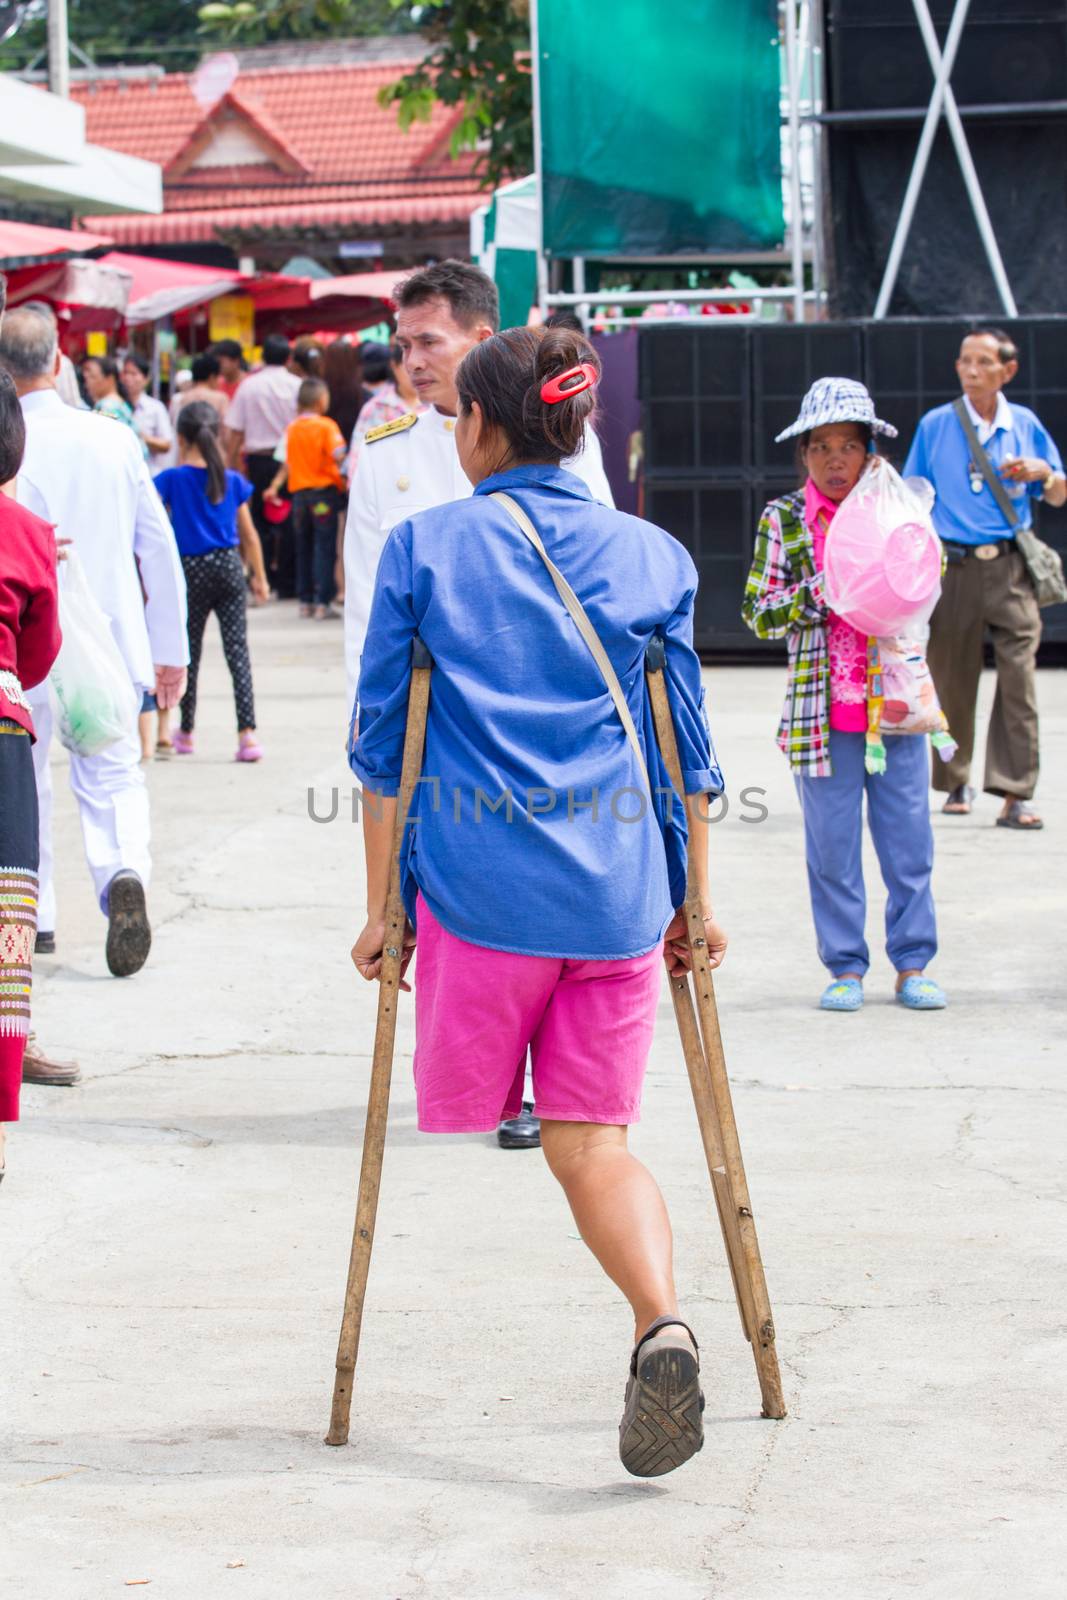 CHIANGRAI, THAILAND - AUG 12: unidentified young disable woman waking in the crowd with crutches on August 12, 2014 in Chiangrai, Thailand.